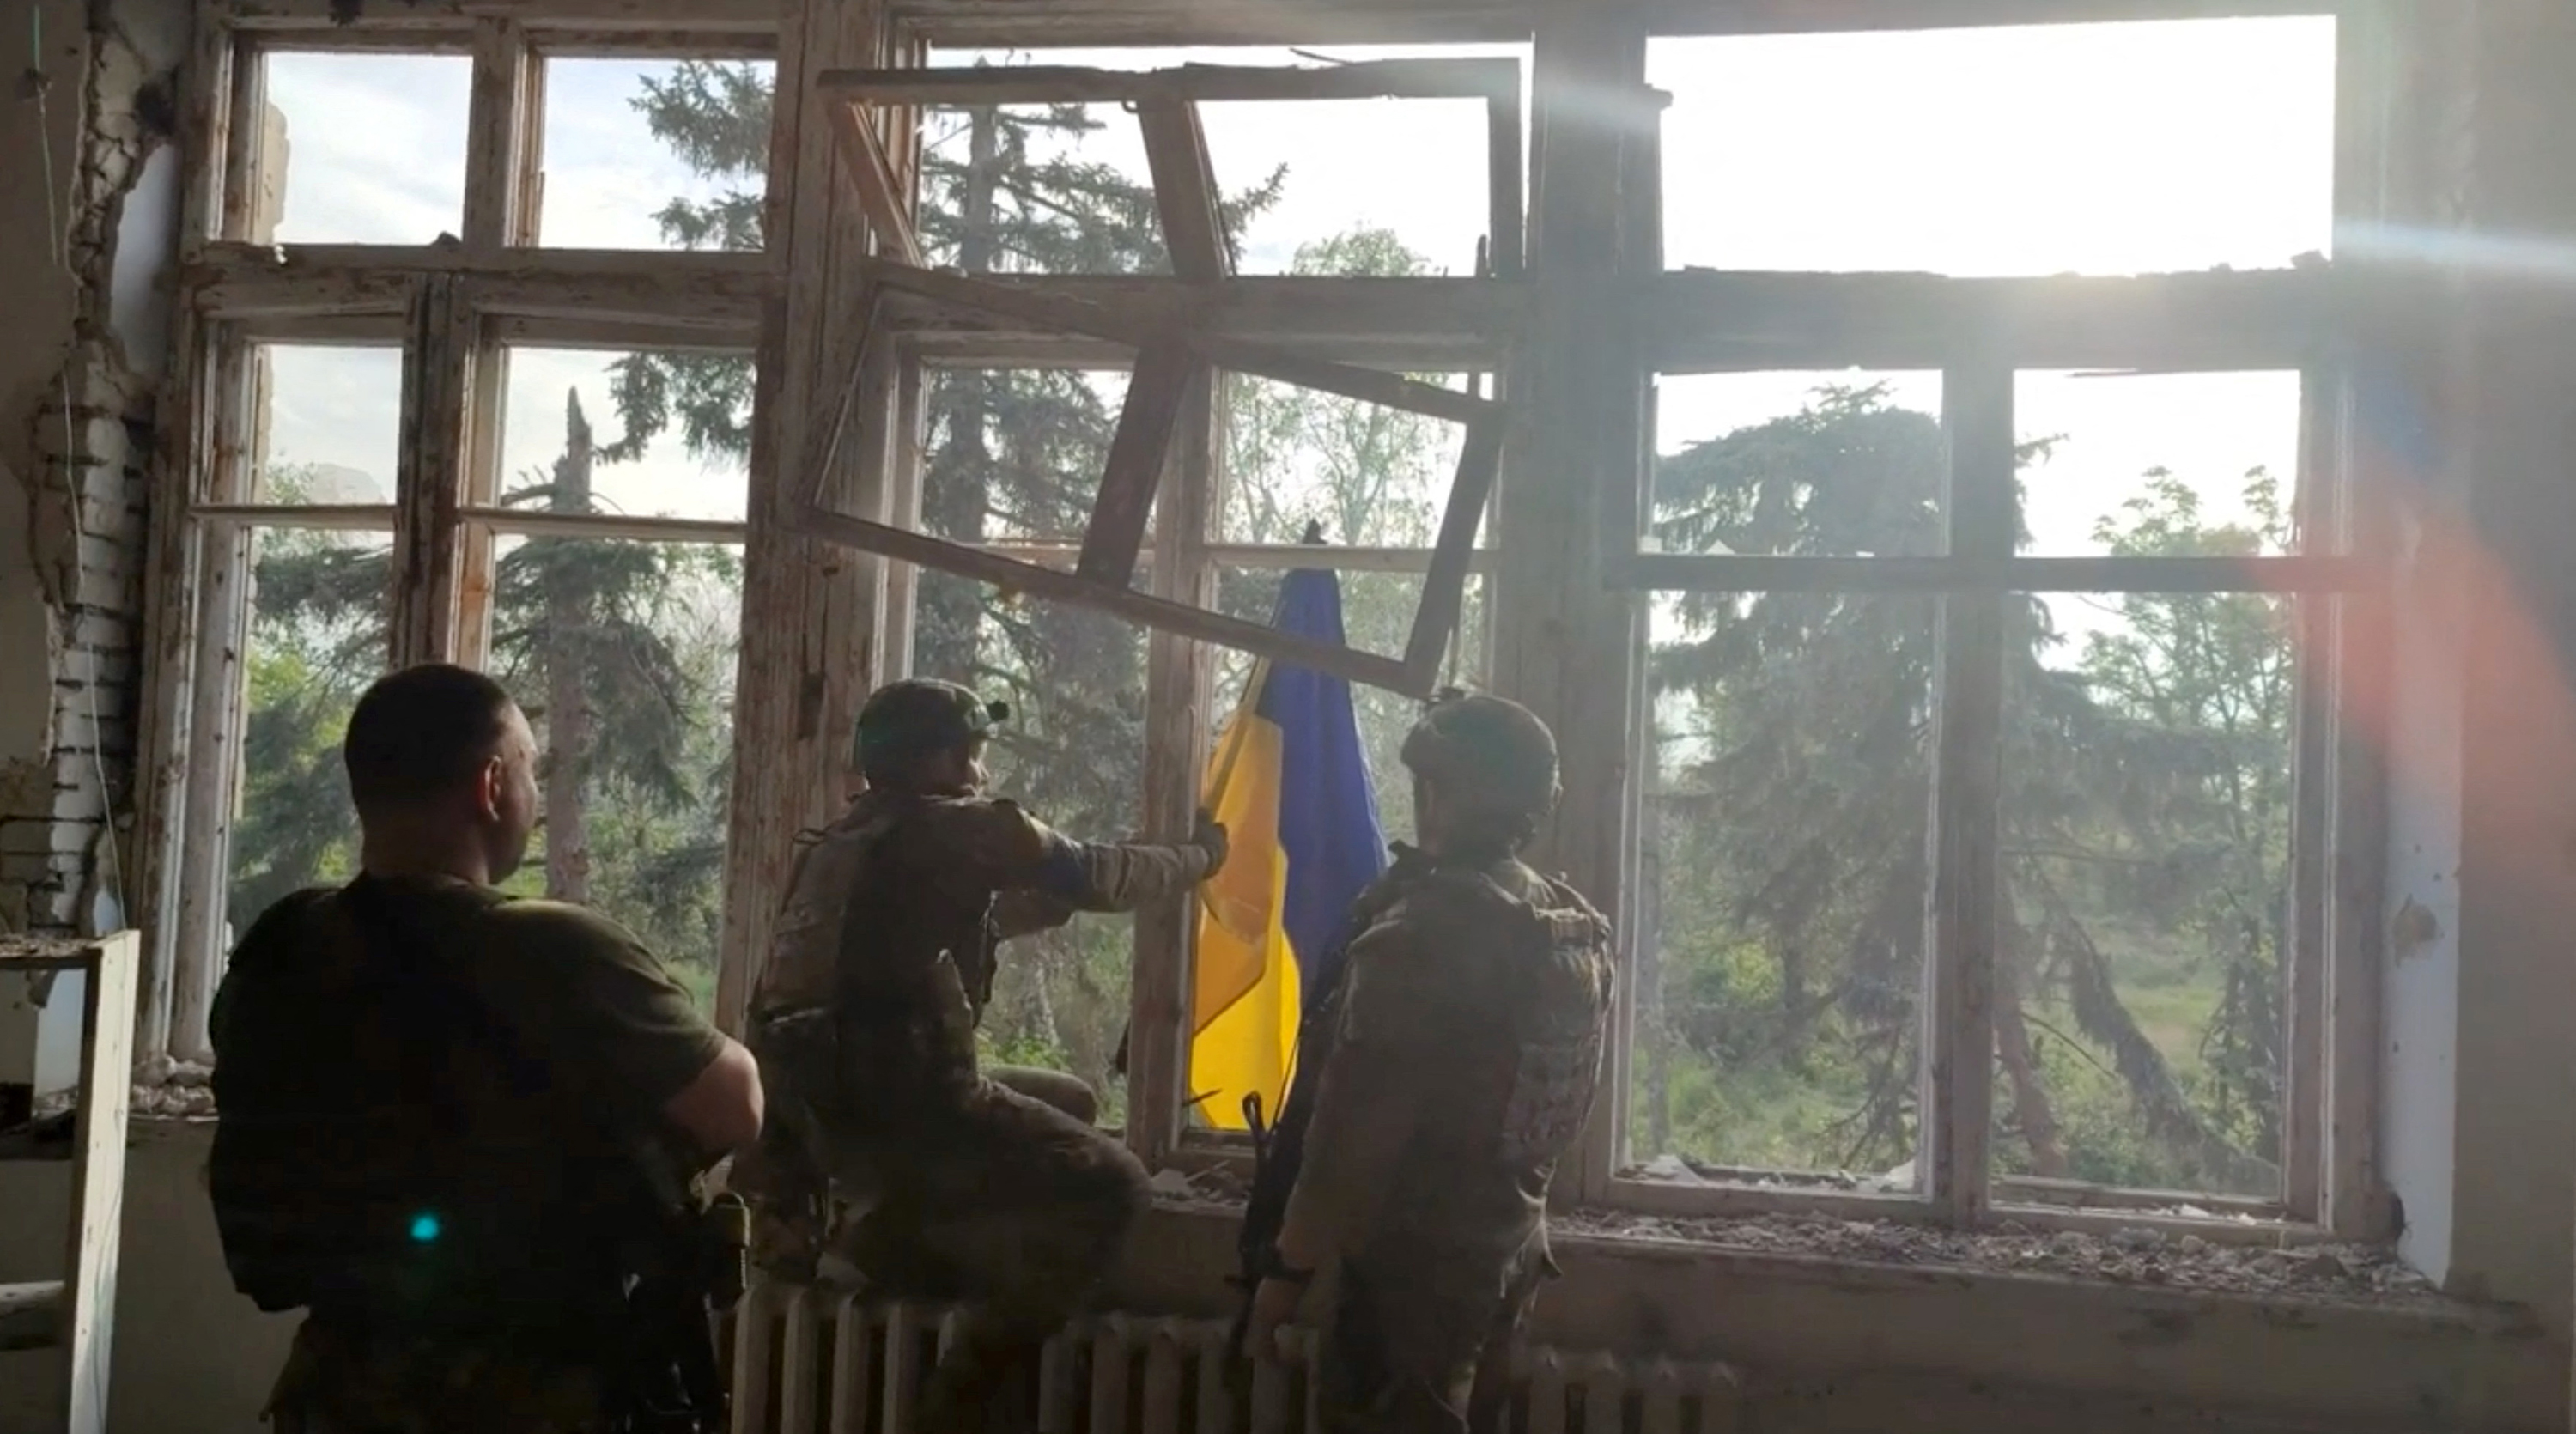 Ukrainian soldiers raise a Ukrainian flag, during an operation that claims to liberate the village of Blahodatne, in this screengrab taken from a handout video released on June 11. 